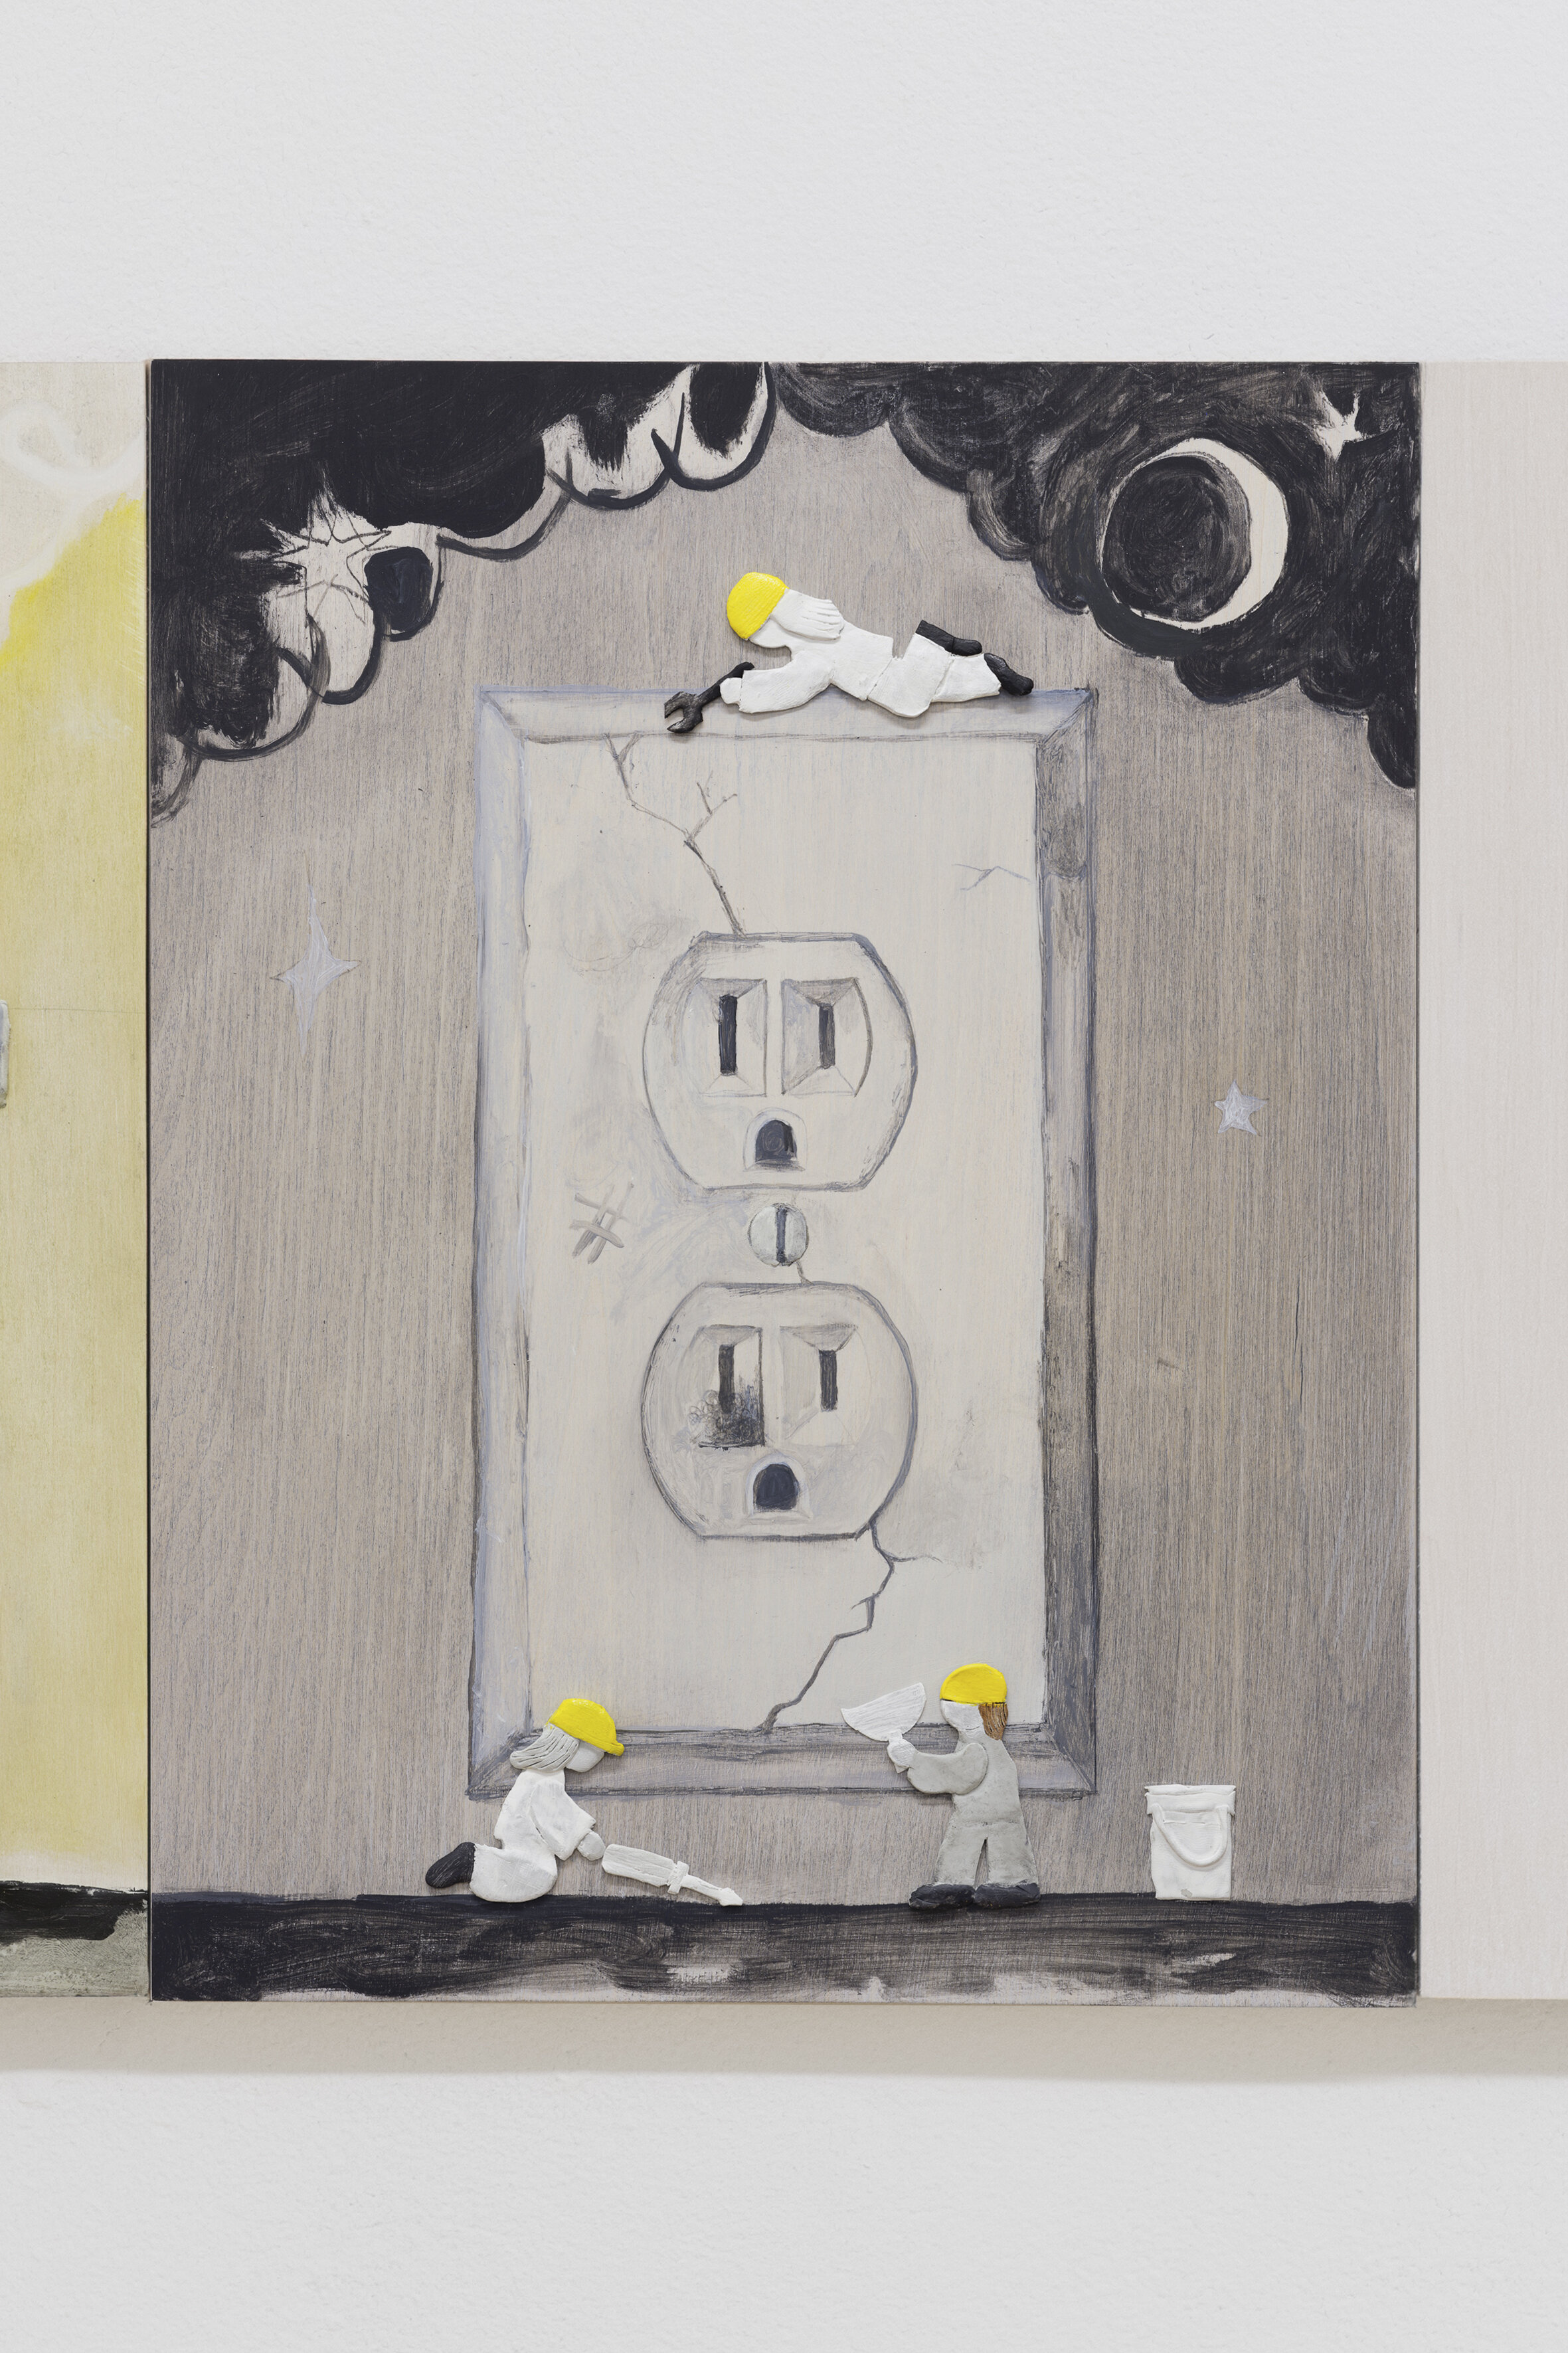  Dennis Witkin  Repairing Outlet,  2020 Oil paint, acrylic paint, cal-tint, wood-stain, charcoal, graphite, epoxy clay, polymer clay on panel 14 x 11 inches 